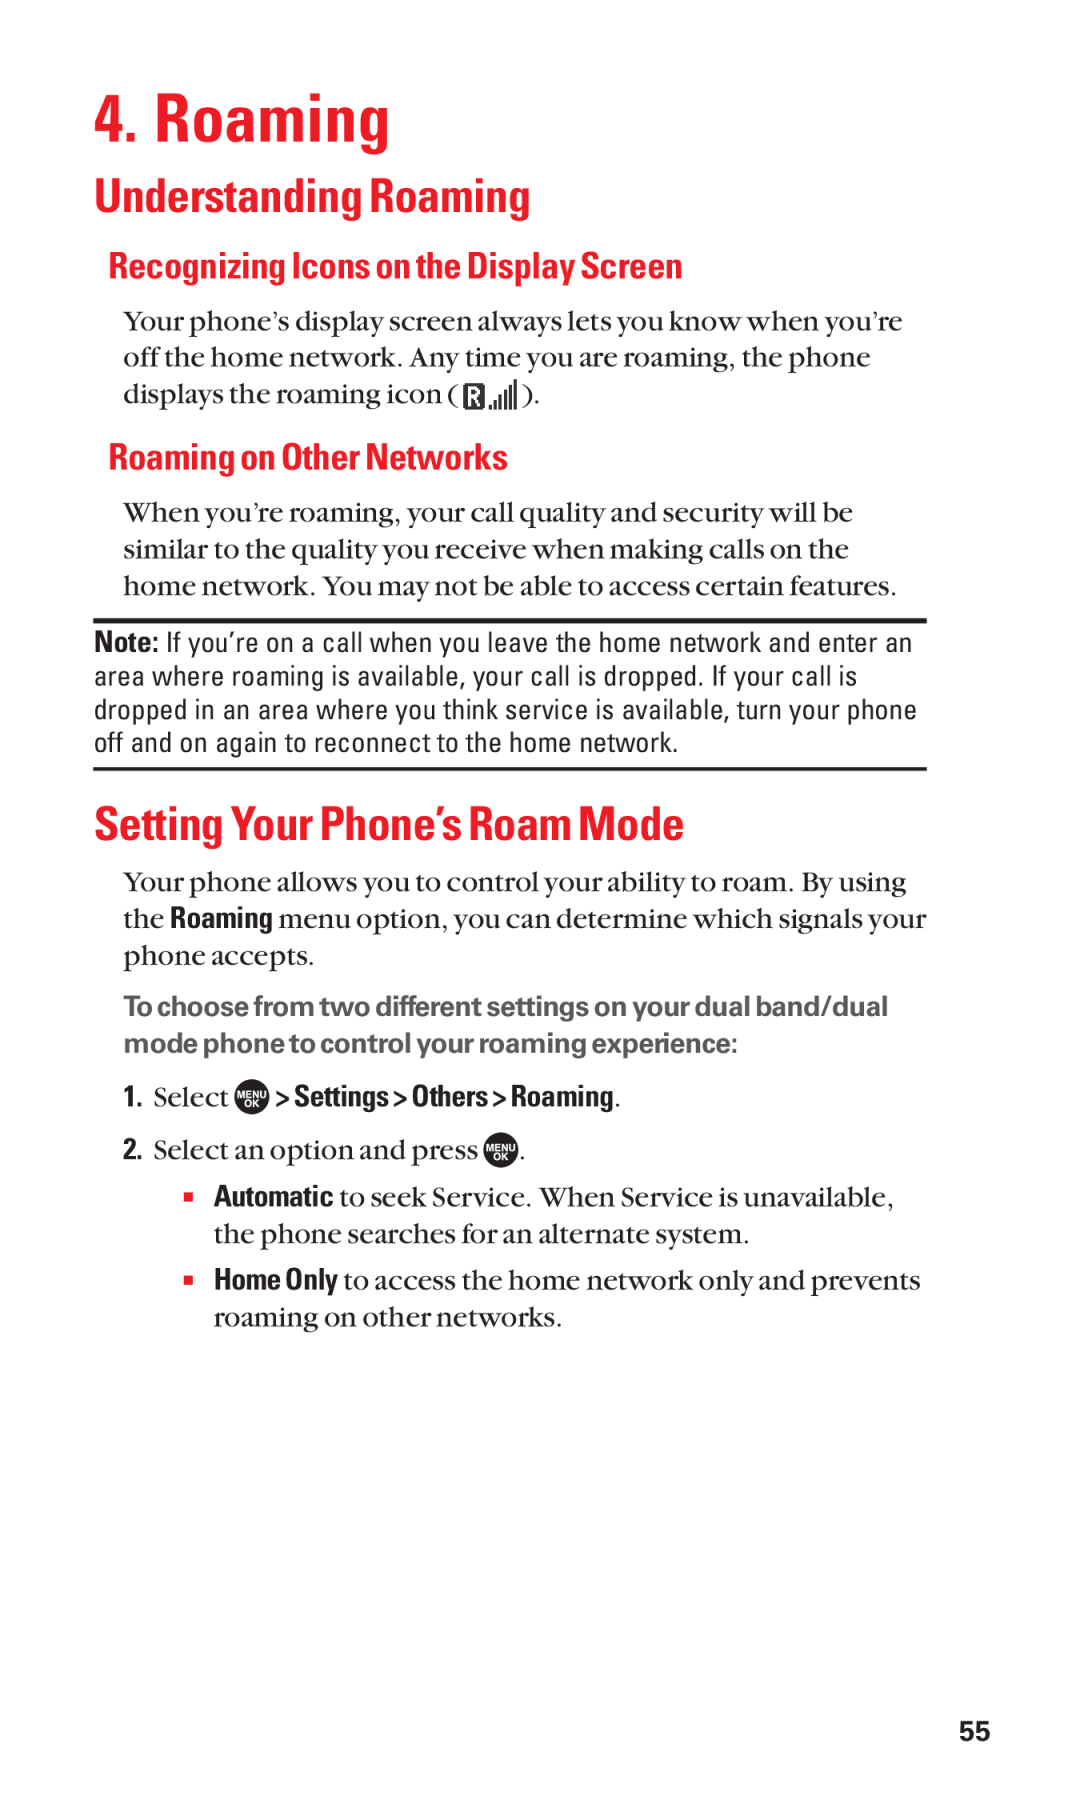 Sanyo SCP-7050 manual Understanding Roaming, Setting Your Phone’s Roam Mode, Recognizing Icons on the Display Screen 